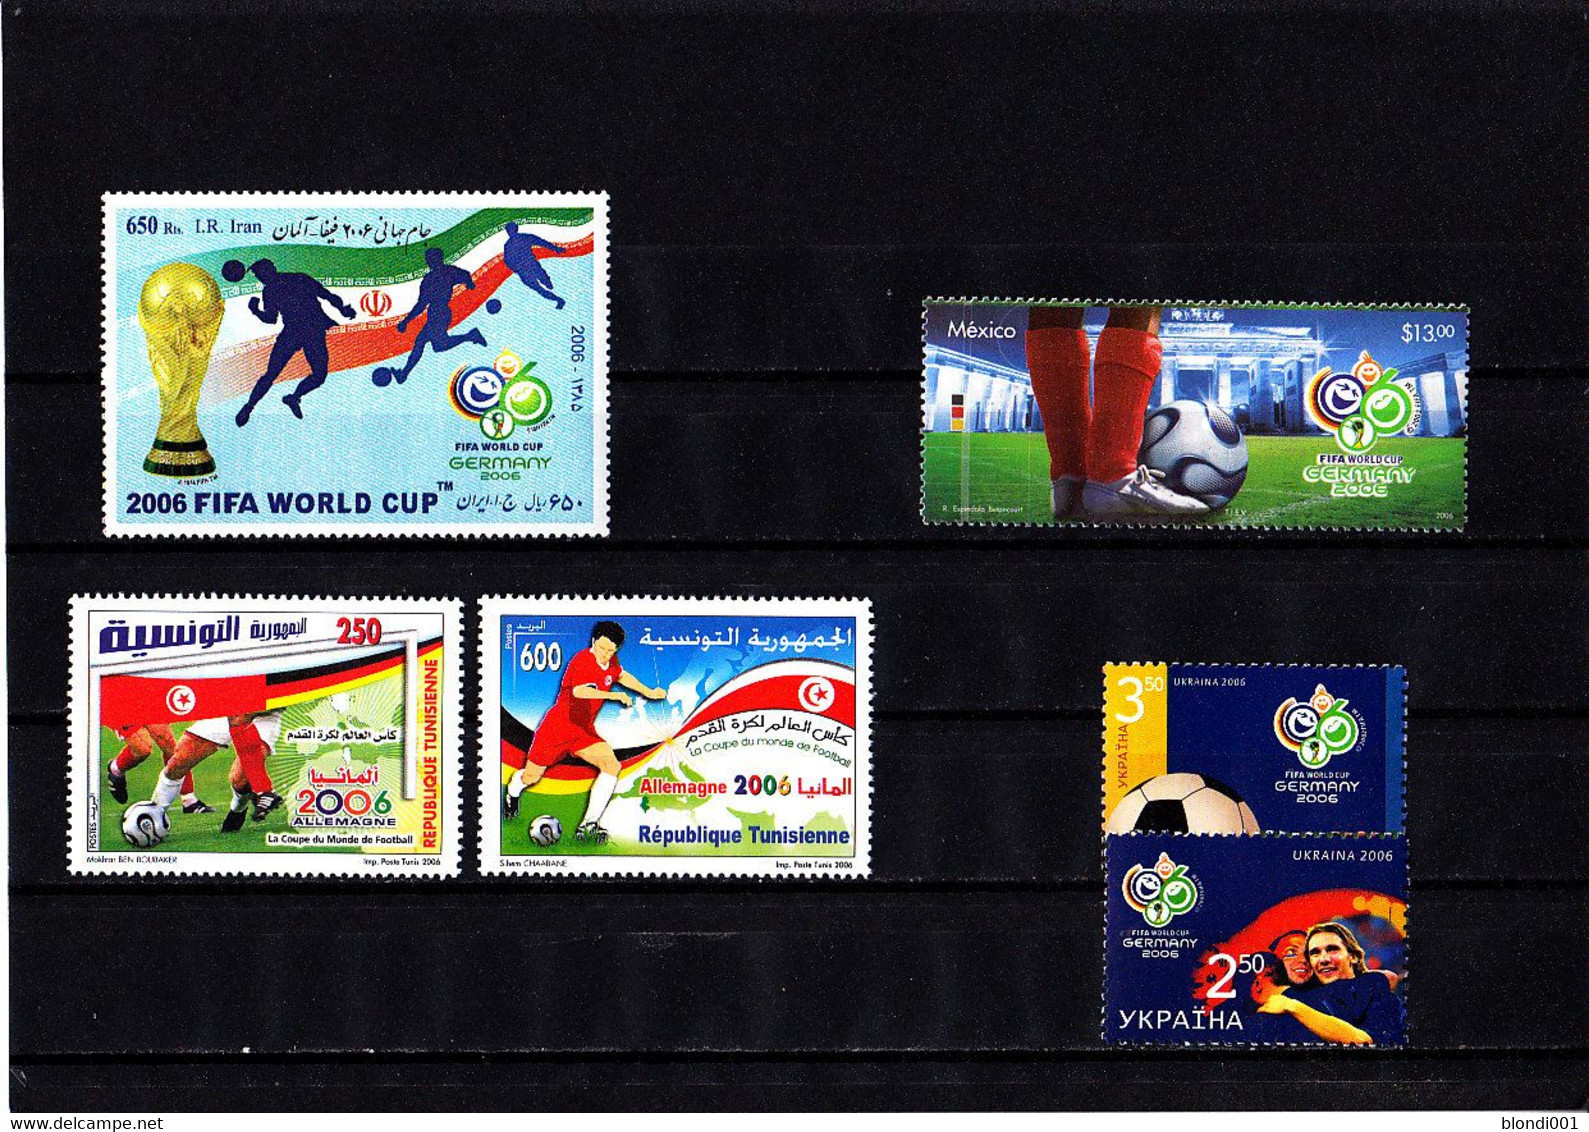 Football - Soccer World Cup 2006 - LOT - 4 Countries MNH - 2006 – Germany